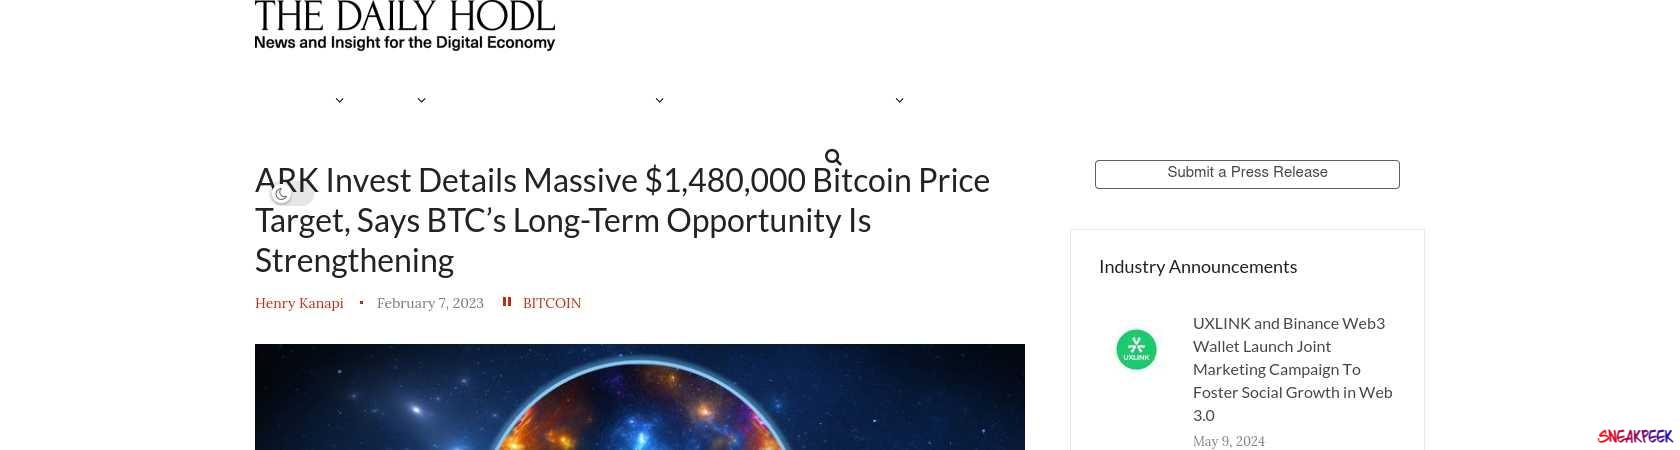 Read the full Article:  ⭲ ARK Invest Details Massive $1,480,000 Bitcoin Price Target, Says BTC’s Long-Term Opportunity Is Strengthening